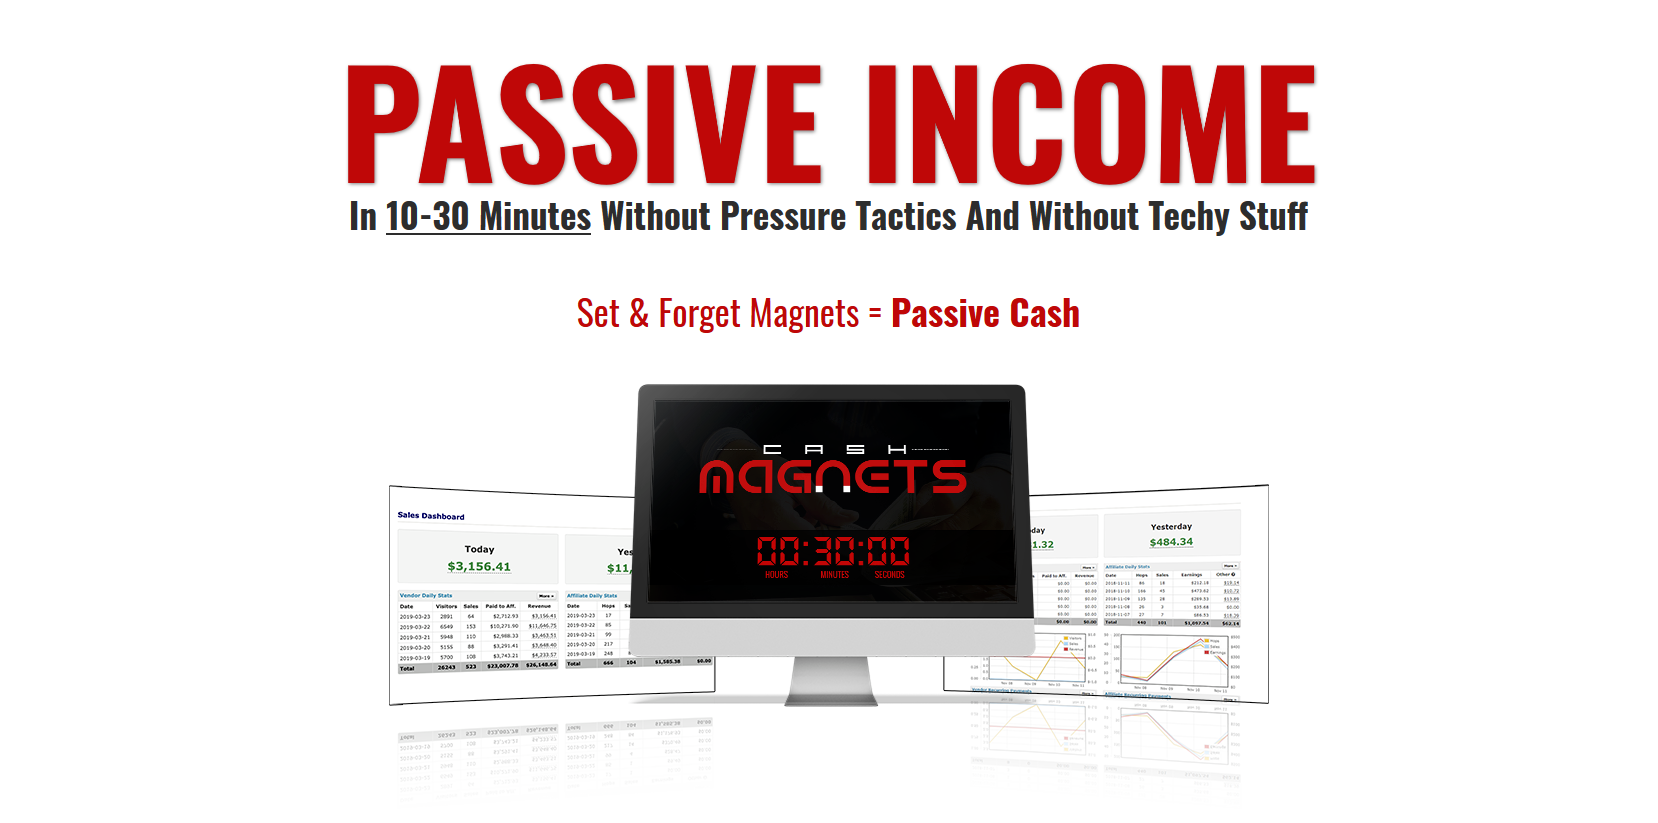 PASSIVE INCOME In 10-30 minutes without pressure tactics and without techy stuff Set & Forget Magnets = Passive Cash My Honest Cash Magnets Review and Custom Bonuses Will Reveal The Products Good and Bad Features.